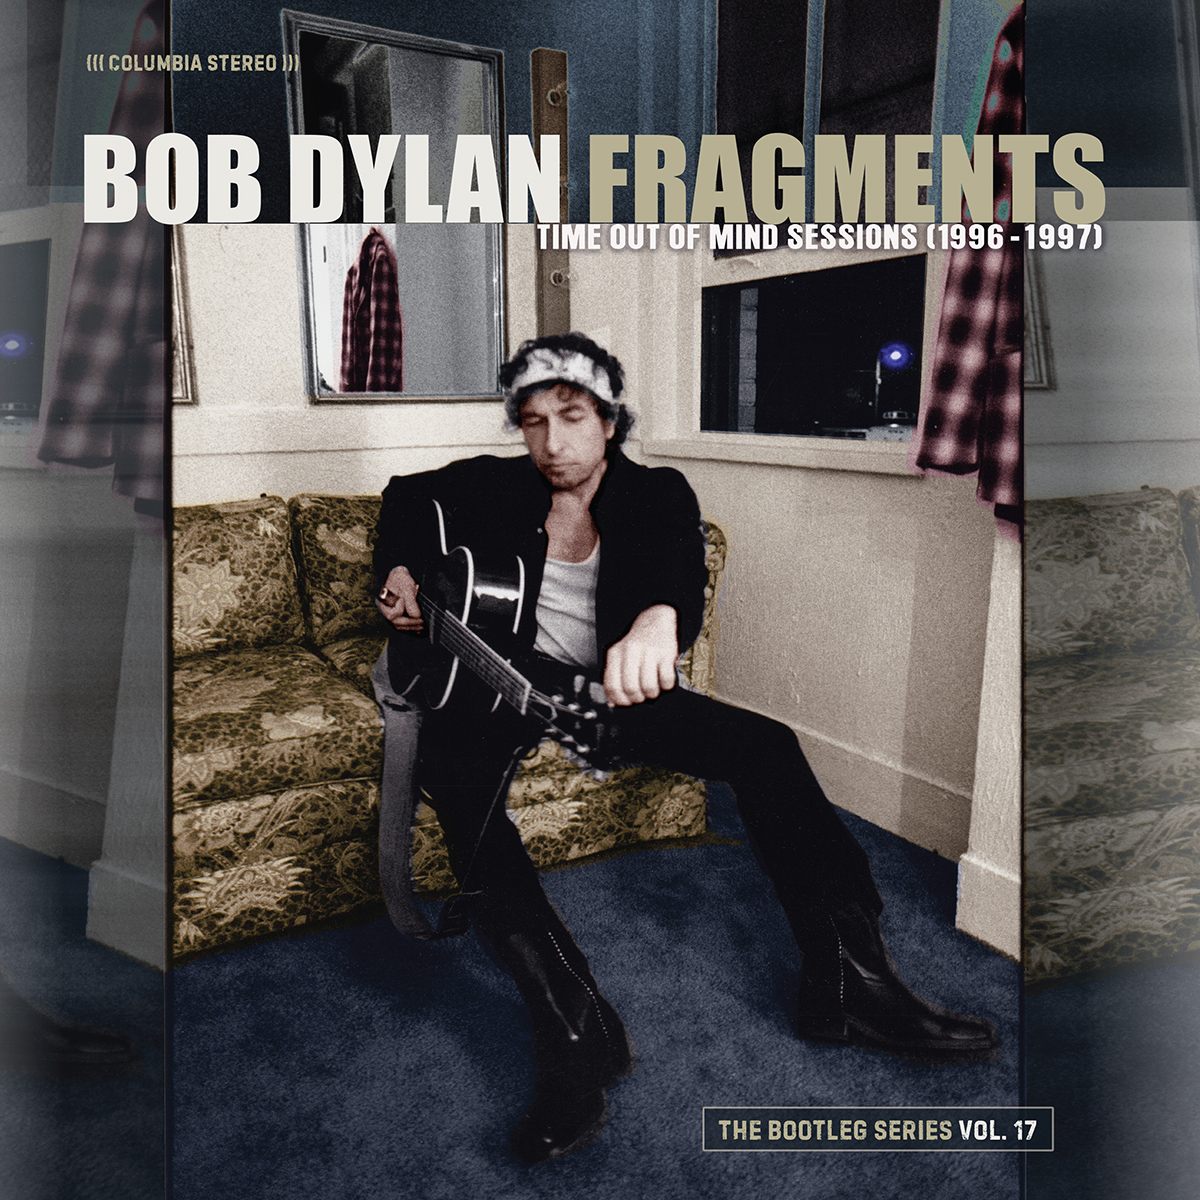 Bob Dylan ‘Fragments &#8211; Time Out Of Mind Sessions’ Bootleg Vol. 17 To Be Released January 27